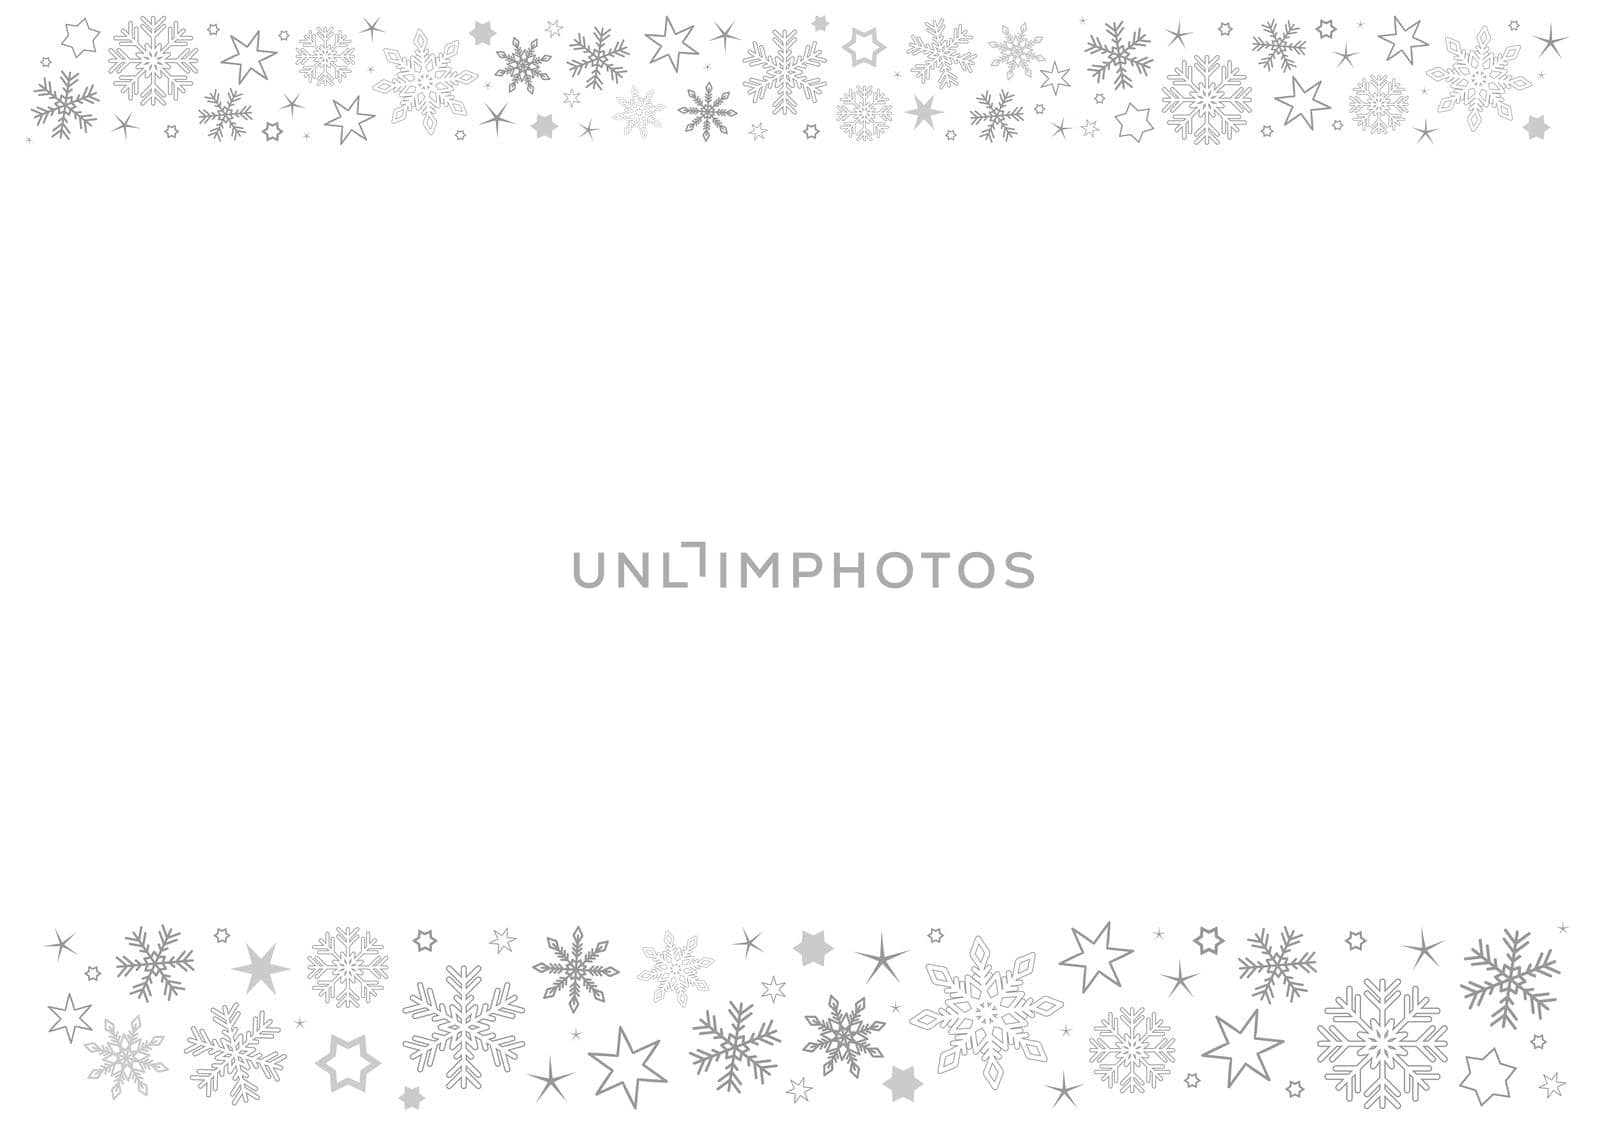 Horizontal white paper background with gray winter snowflakes header and footer by cougarsan